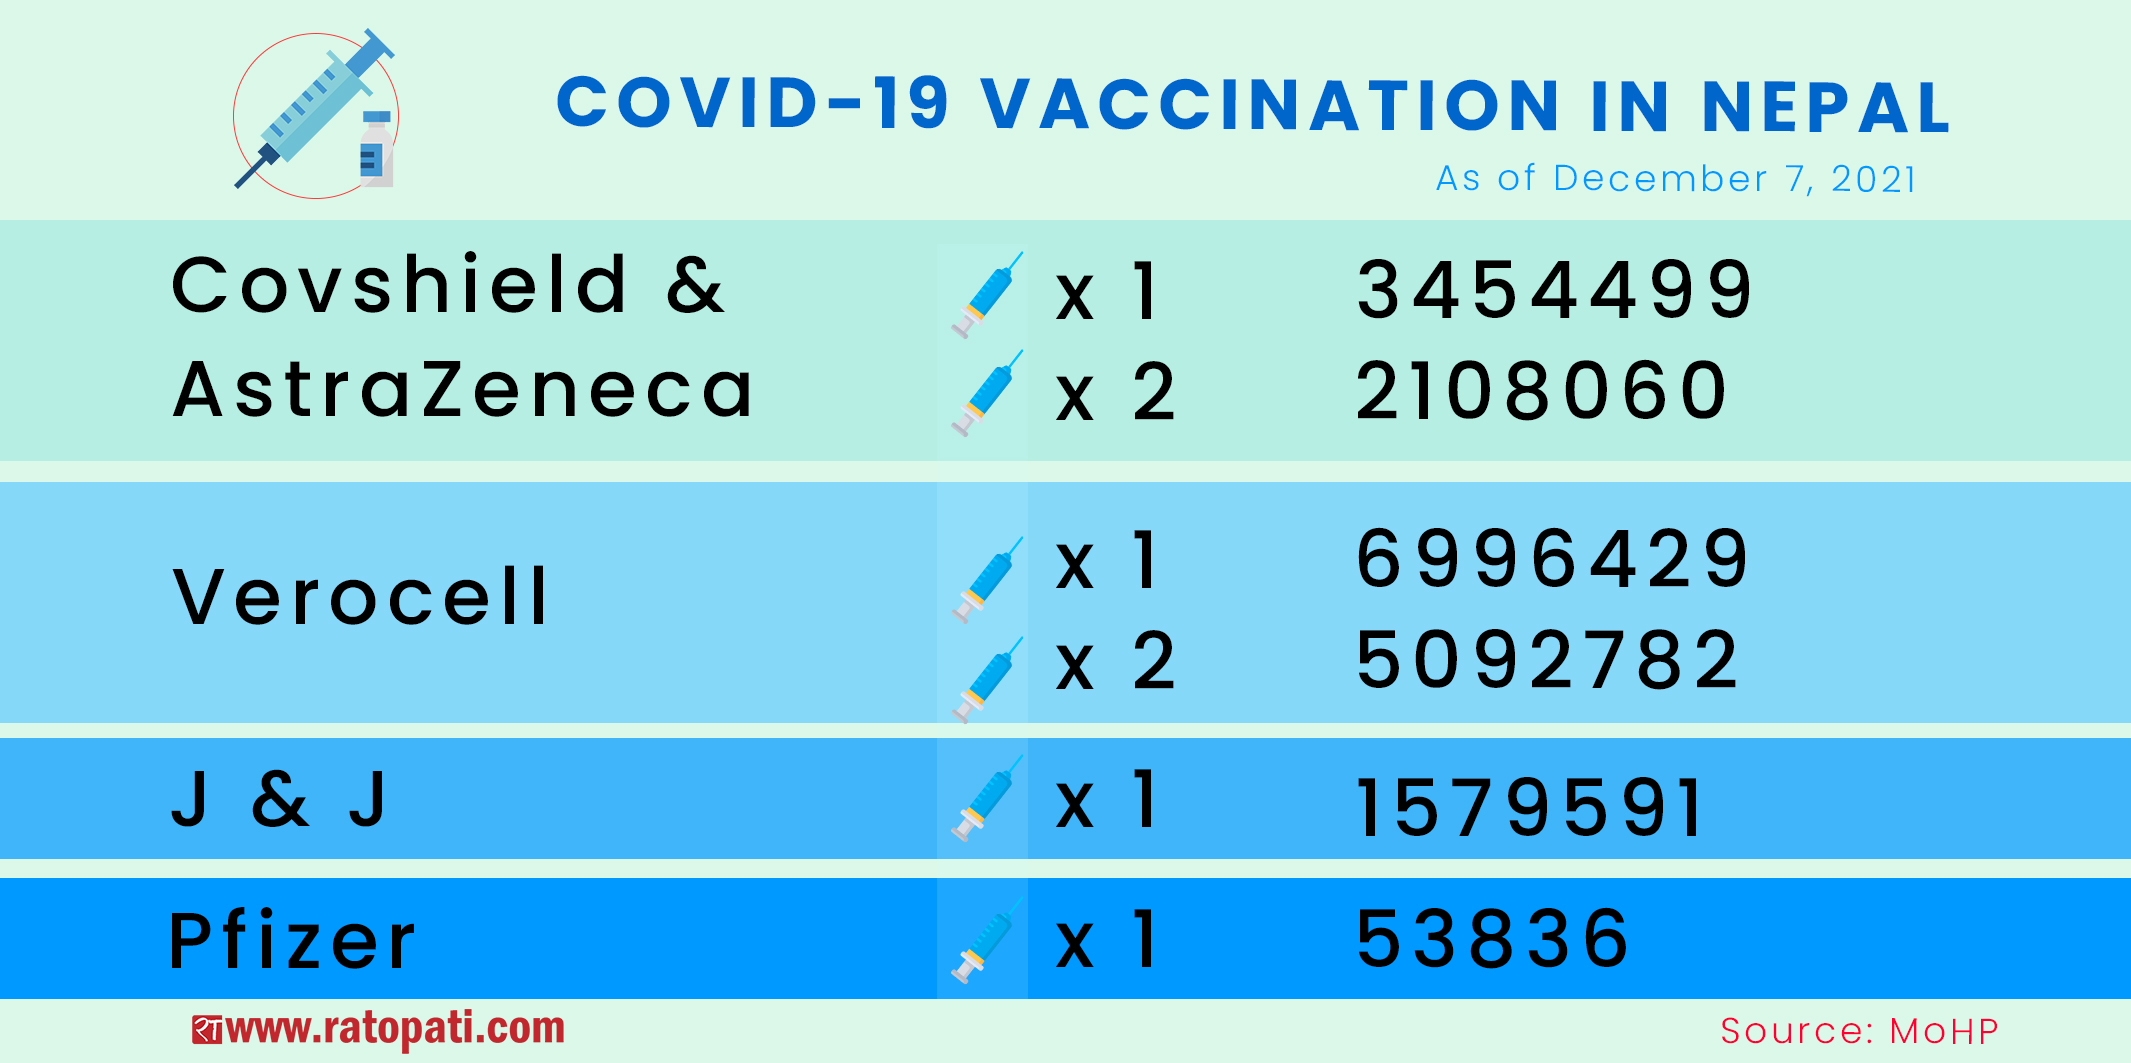 Nepal’s COVID-19 vaccination status: 8.7 million people fully vaccinated